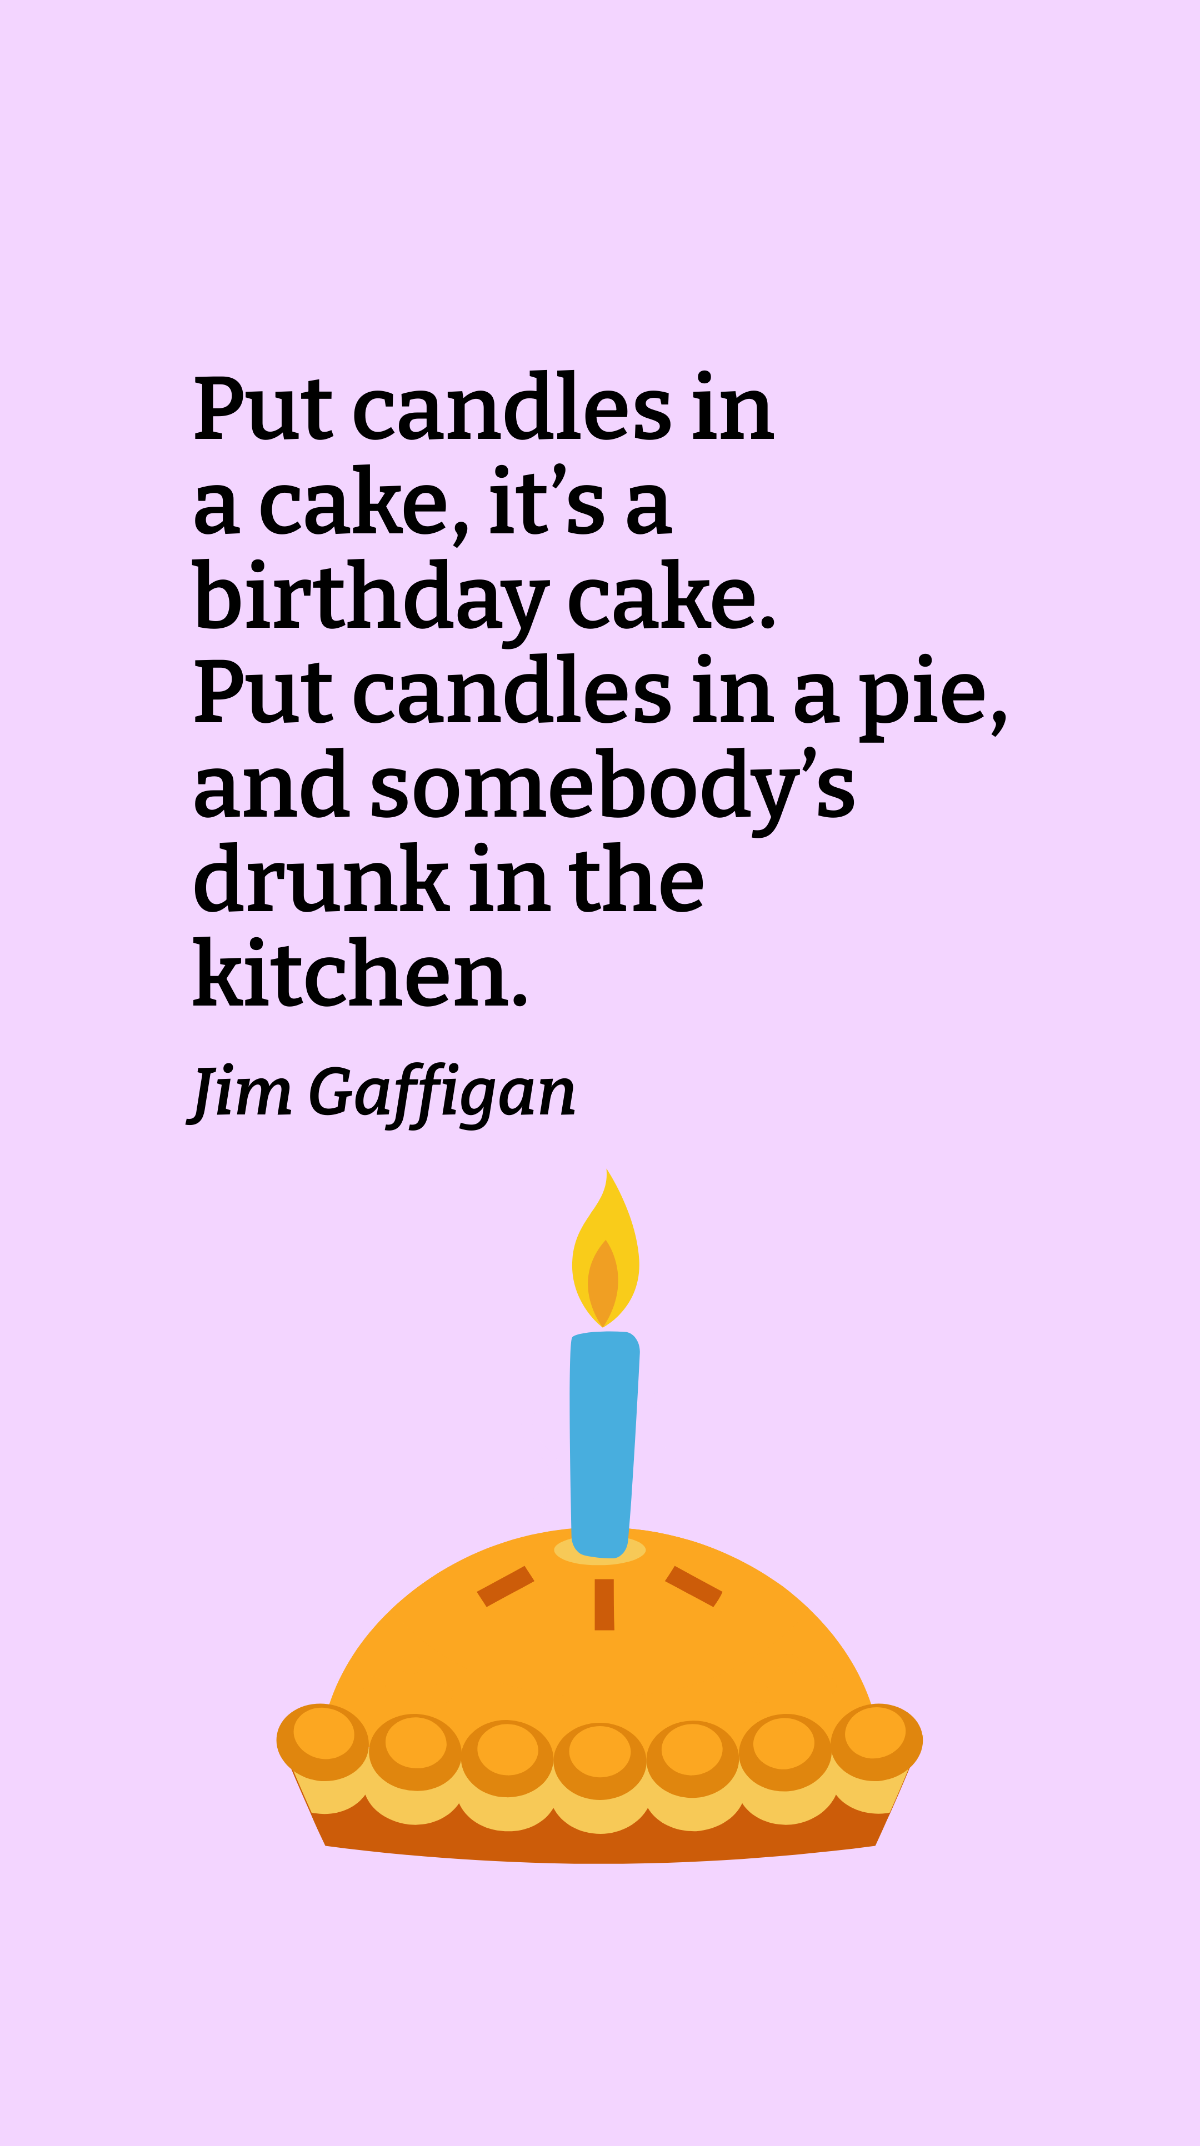 Jim Gaffigan - Put candles in a cake, it’s a birthday cake. Put candles in a pie, and somebody’s drunk in the kitchen. Template